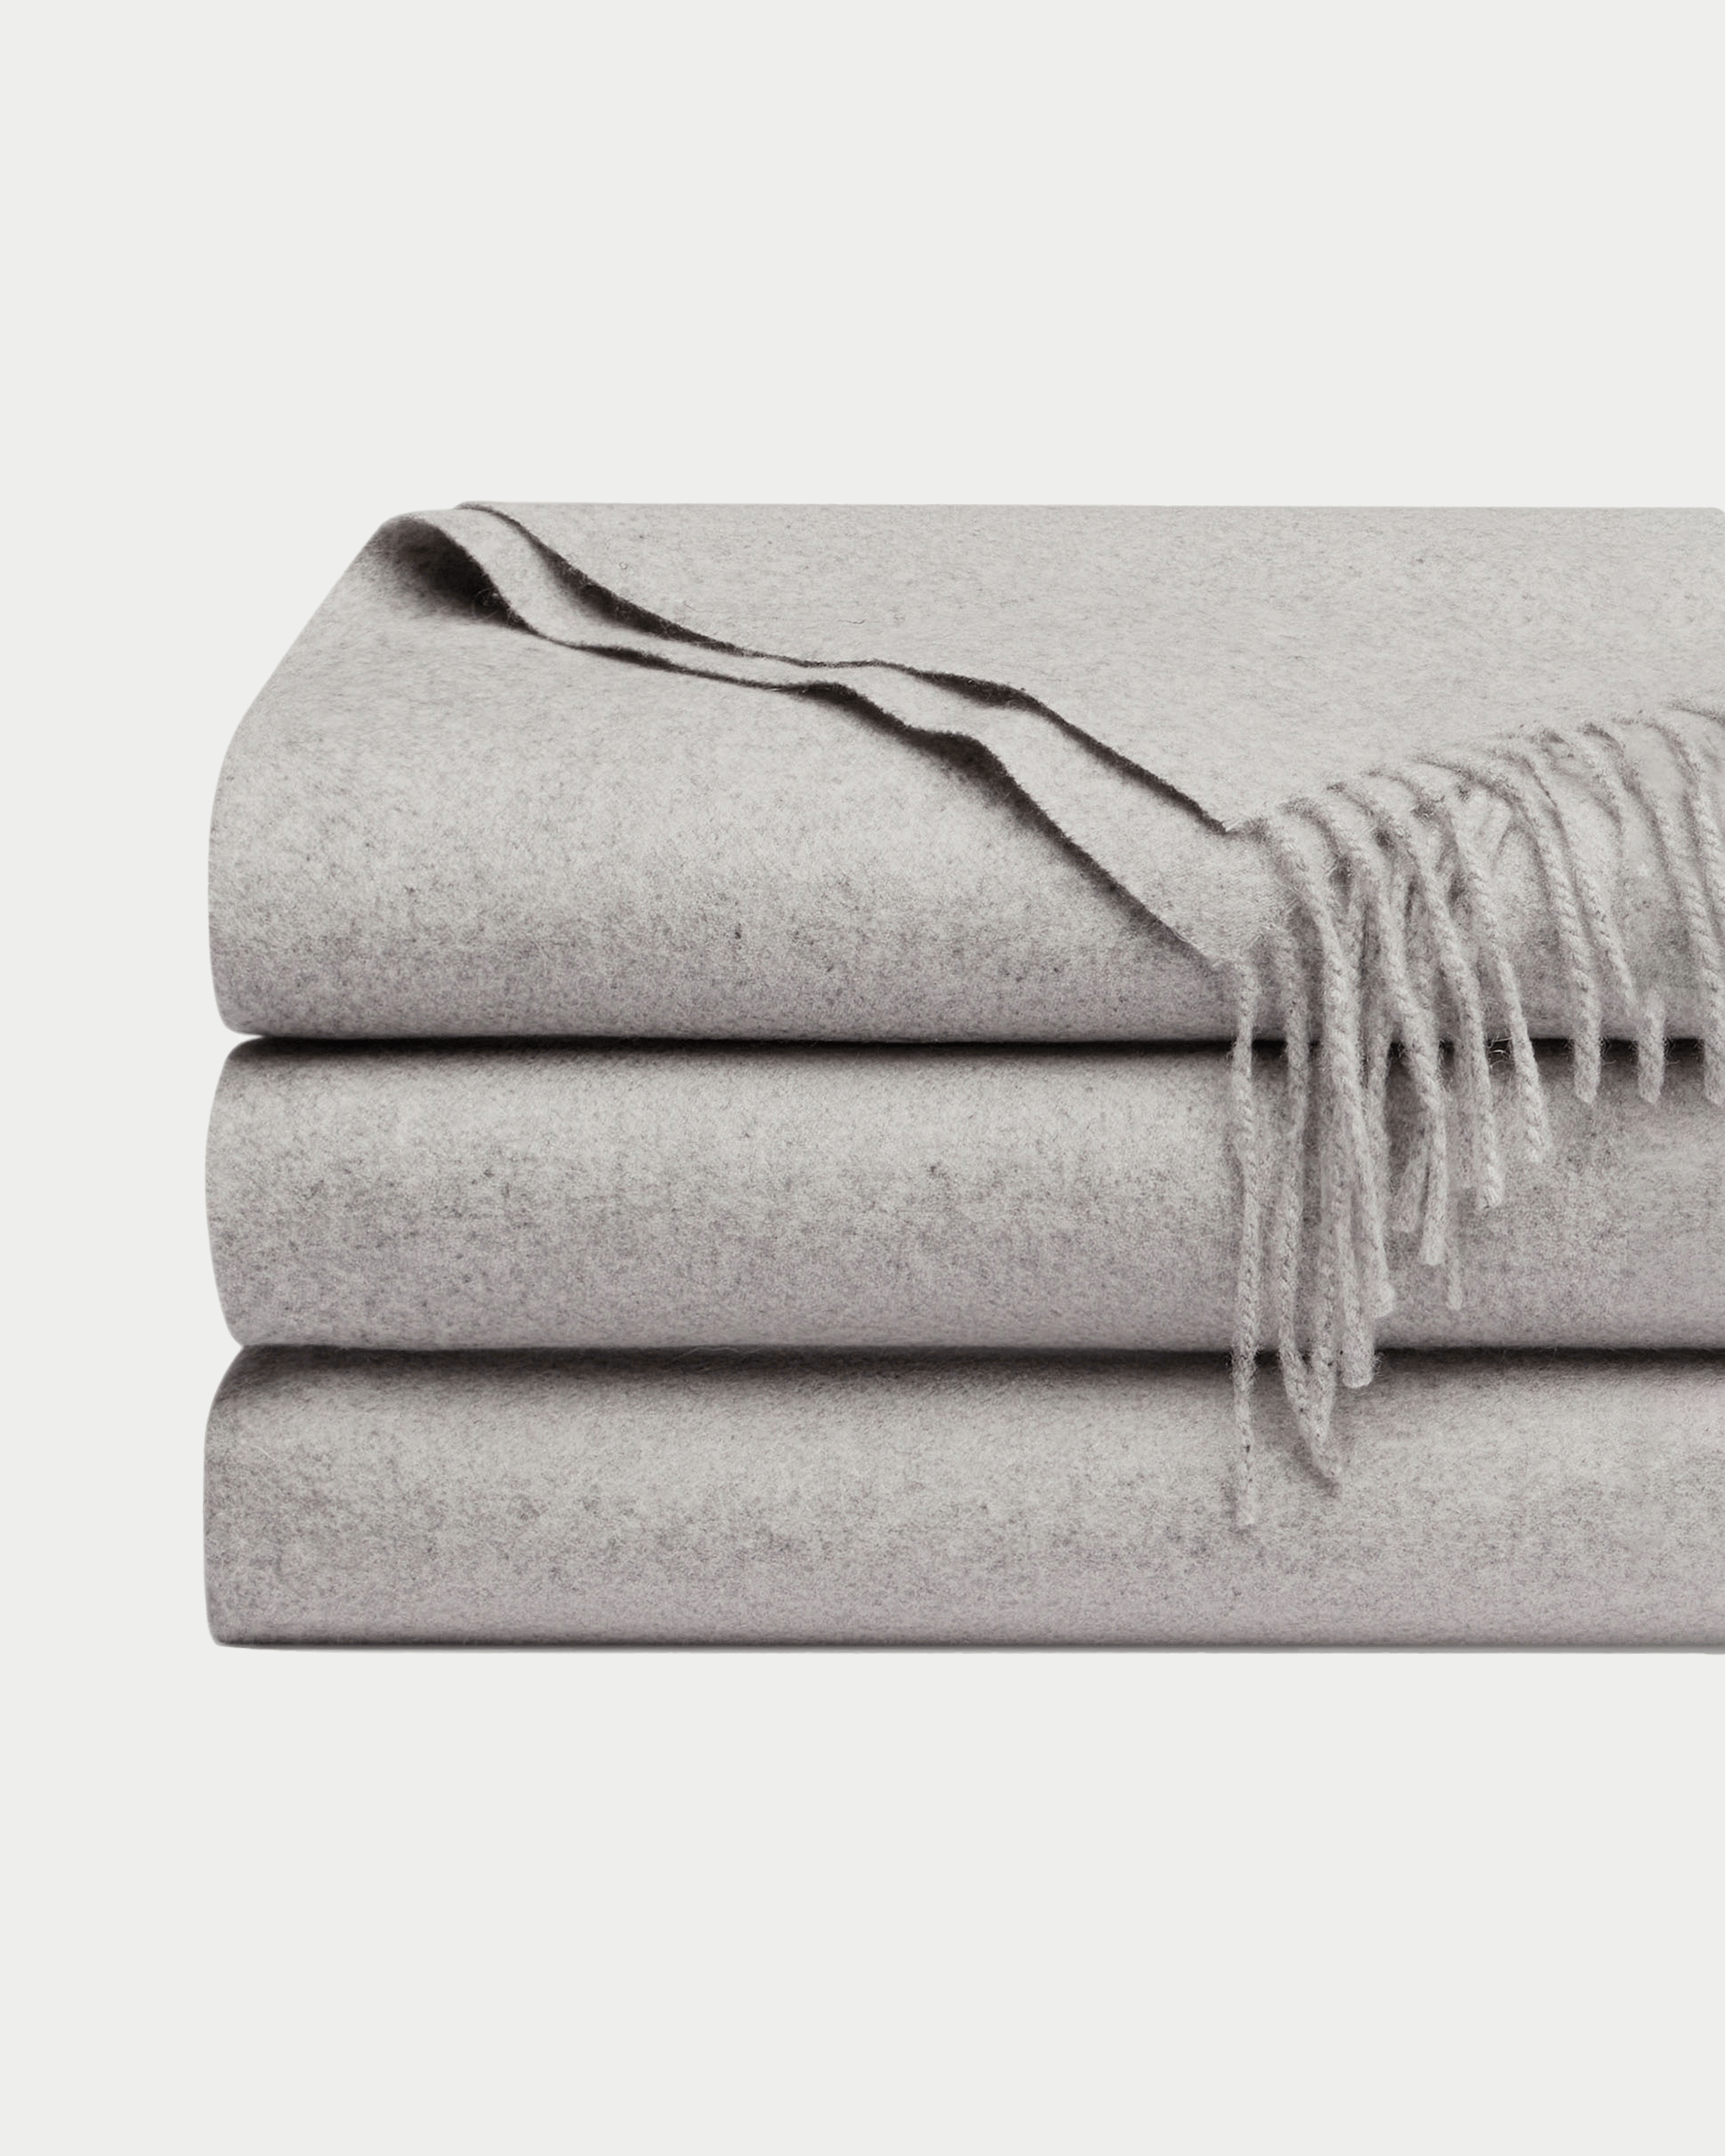 Pebble cashmere tassel throw folded with white background |Color:Pebble